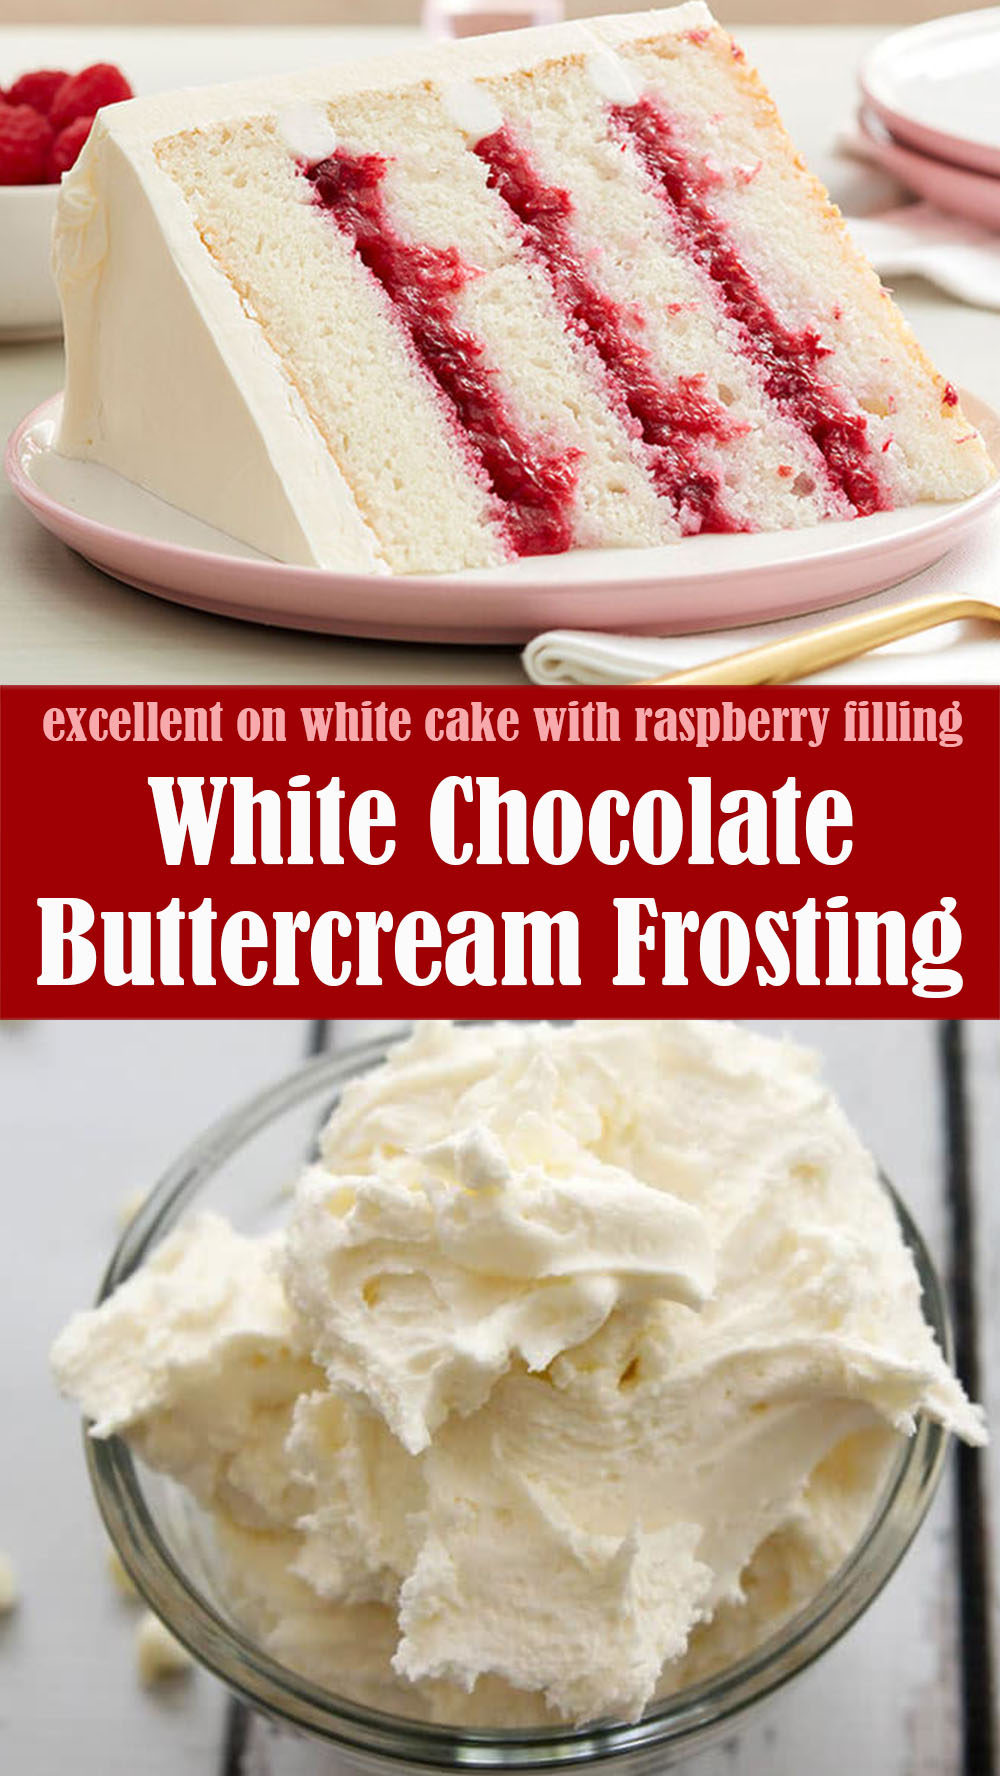 How to Make White Chocolate Buttercream Frosting